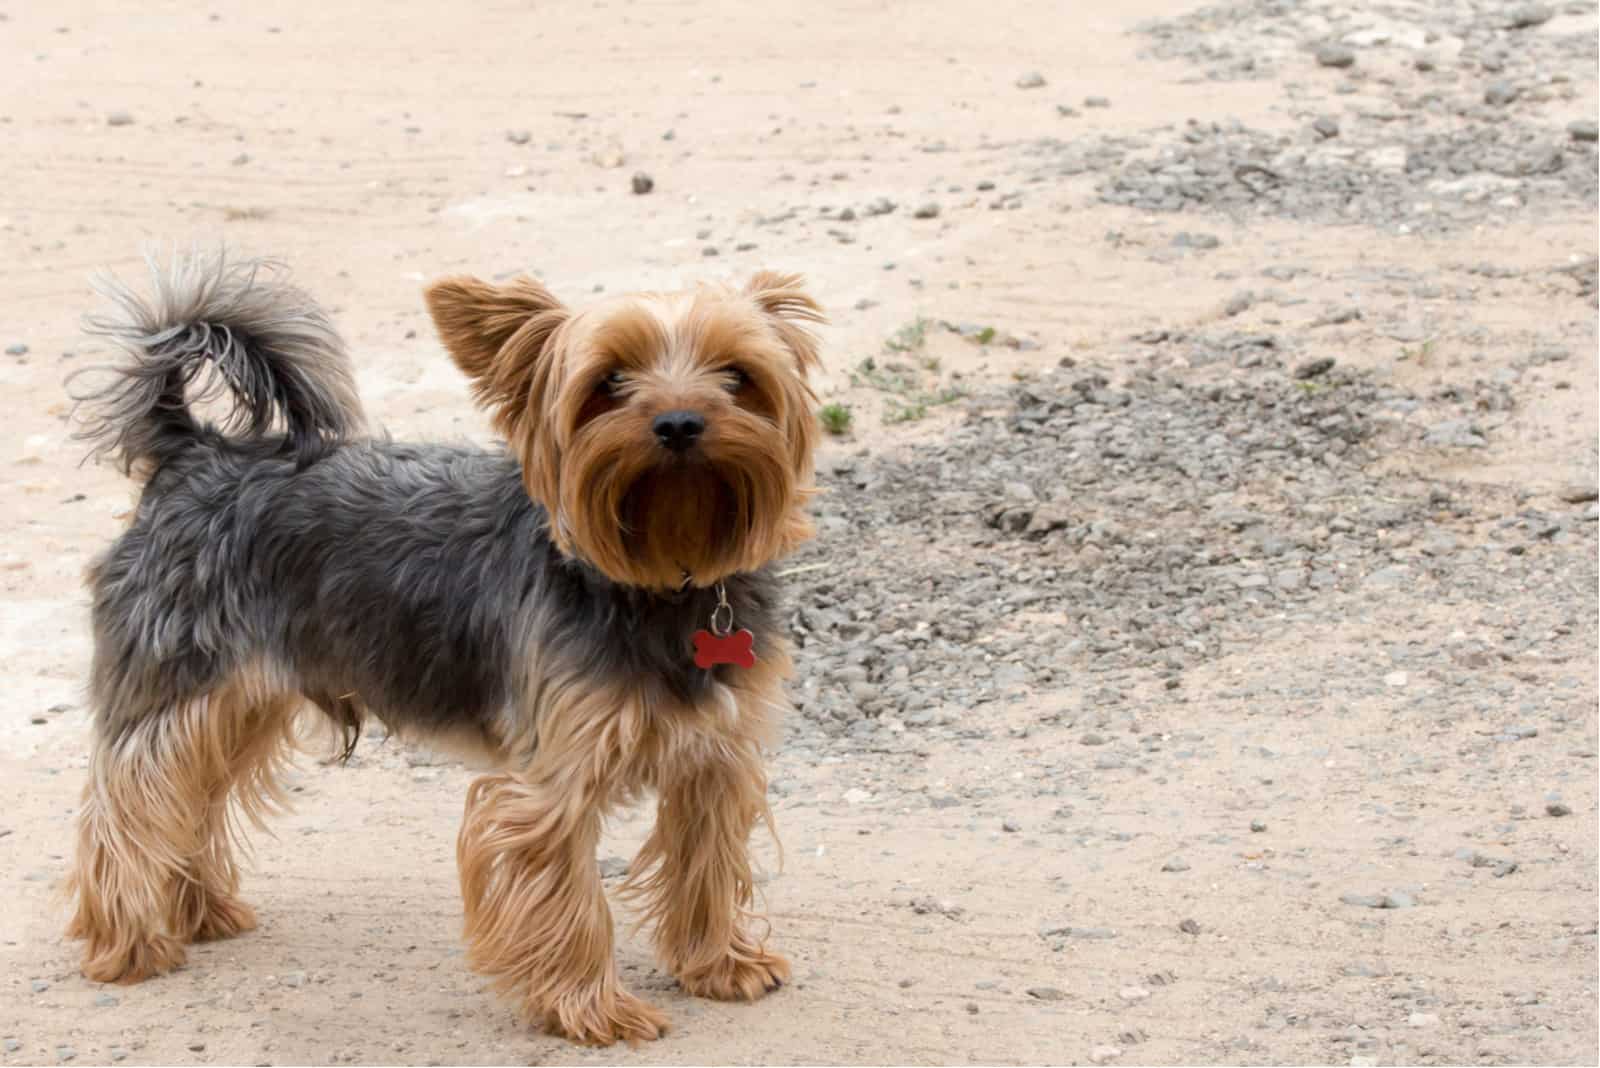 yorkie with a short hair stand on a dirt road